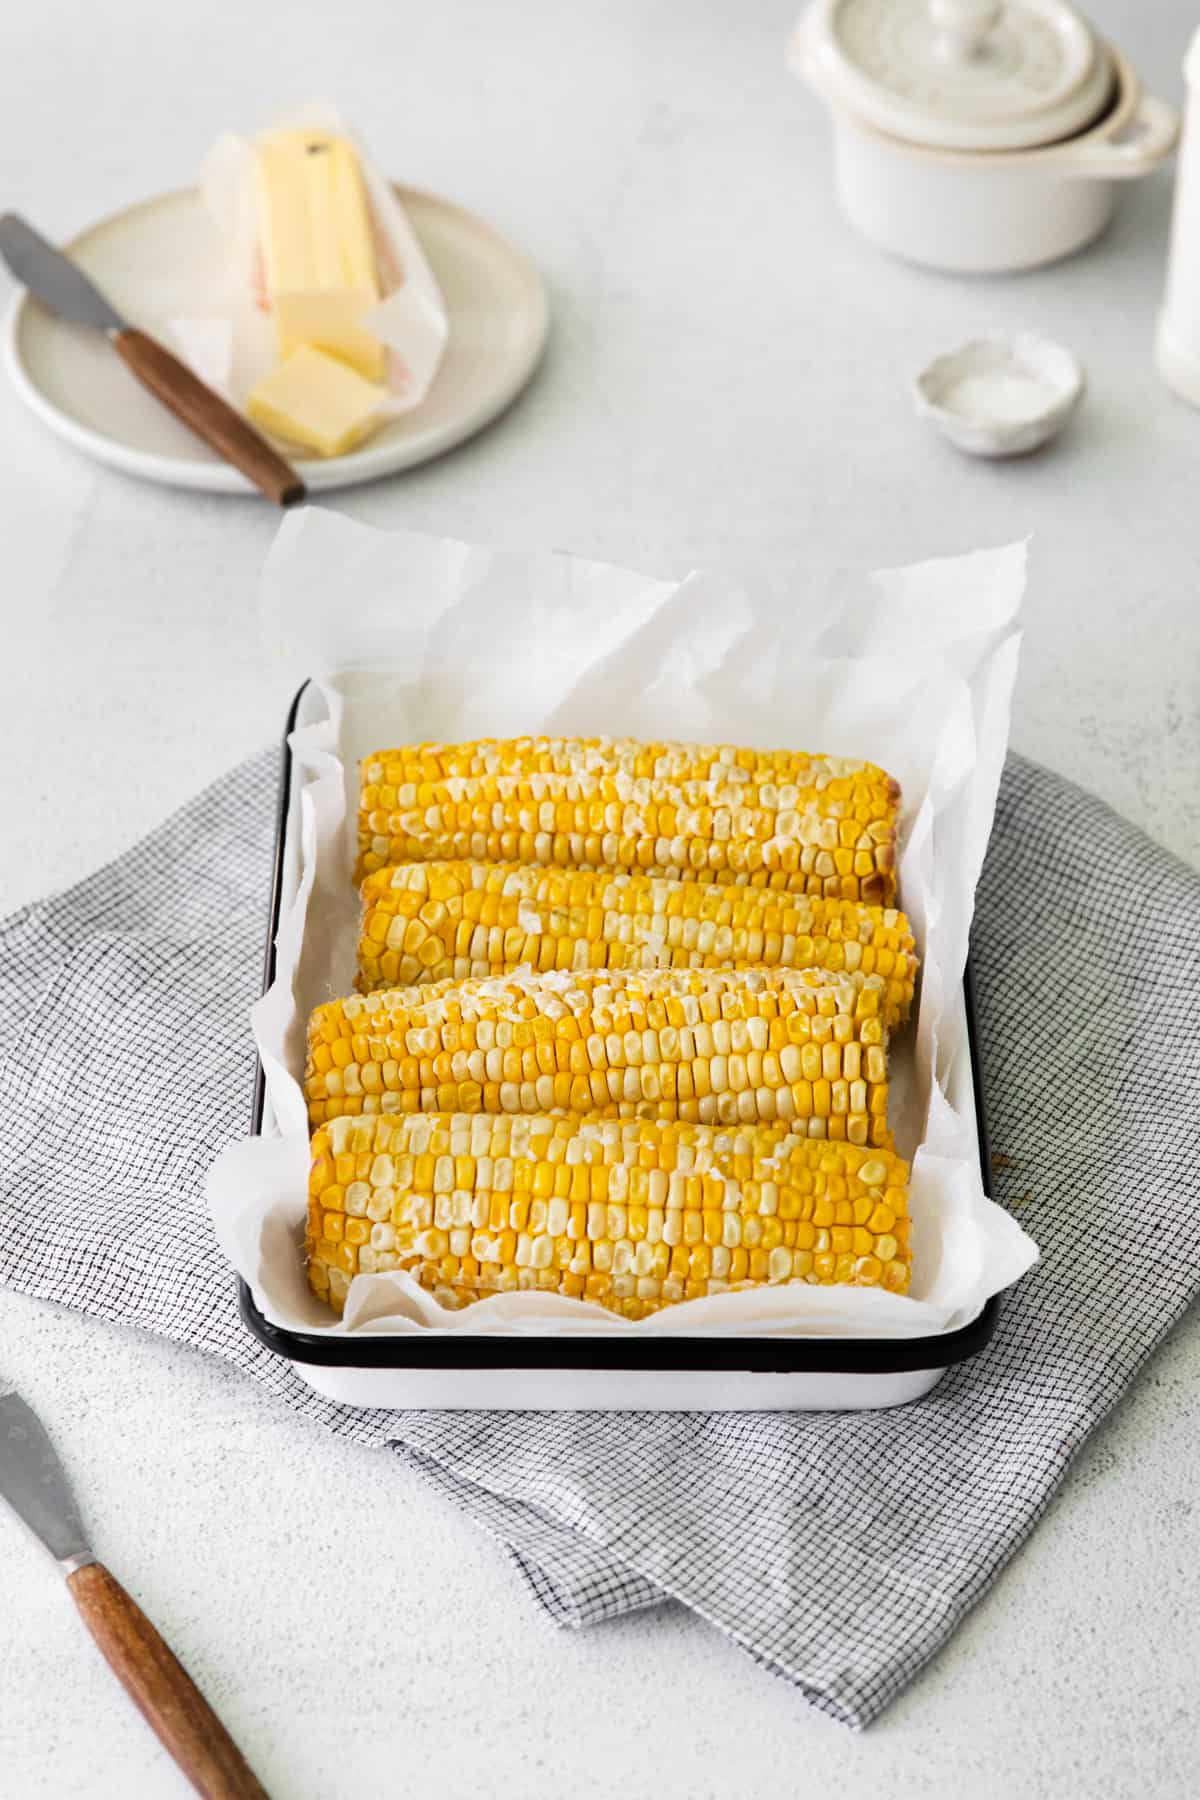 4 ears of corn on the cob on a serving platter